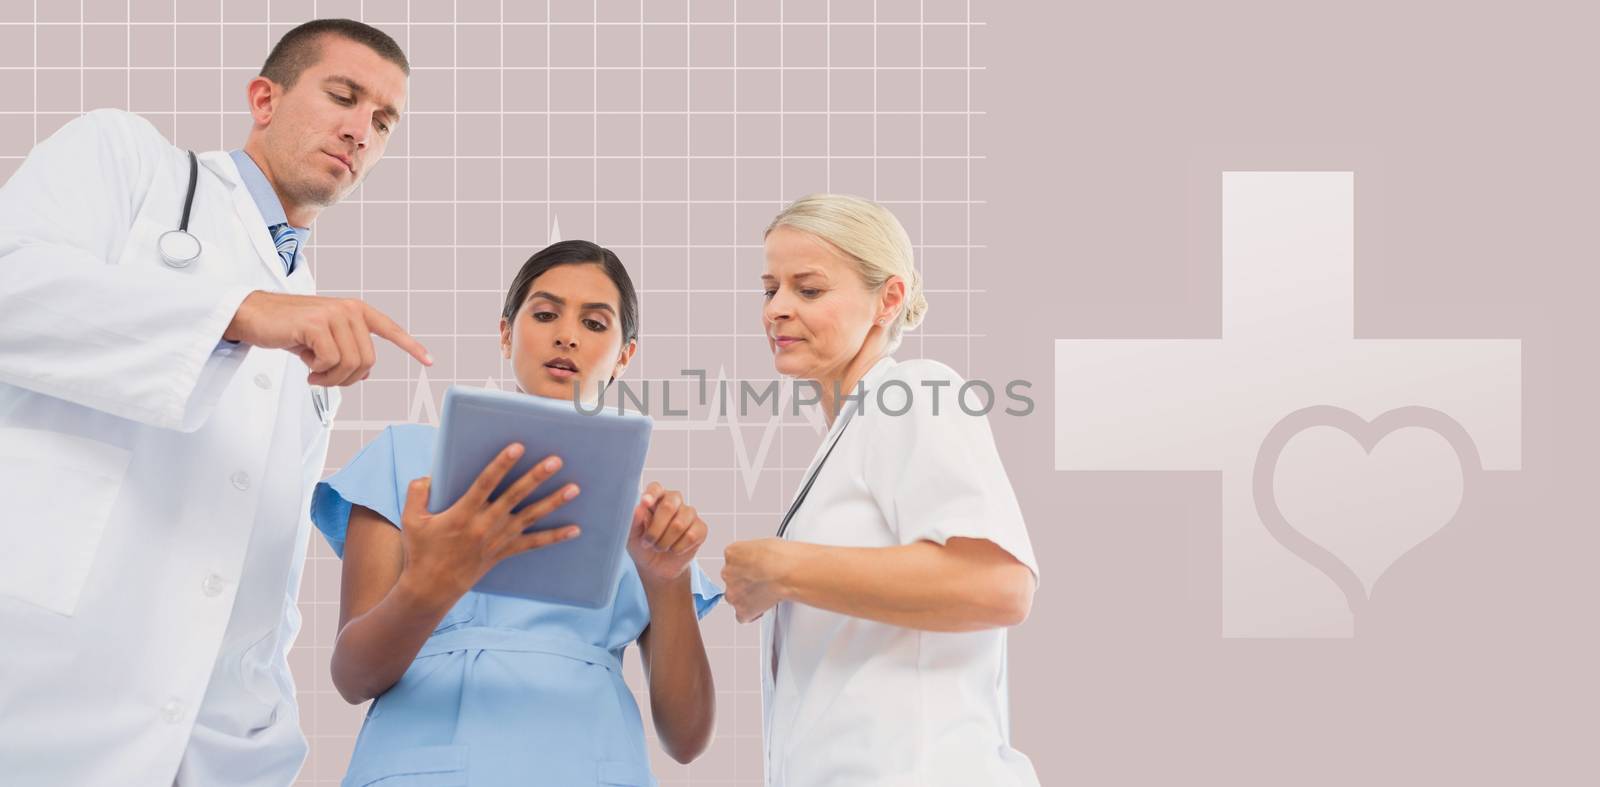 Doctors looking together at tablet against green background